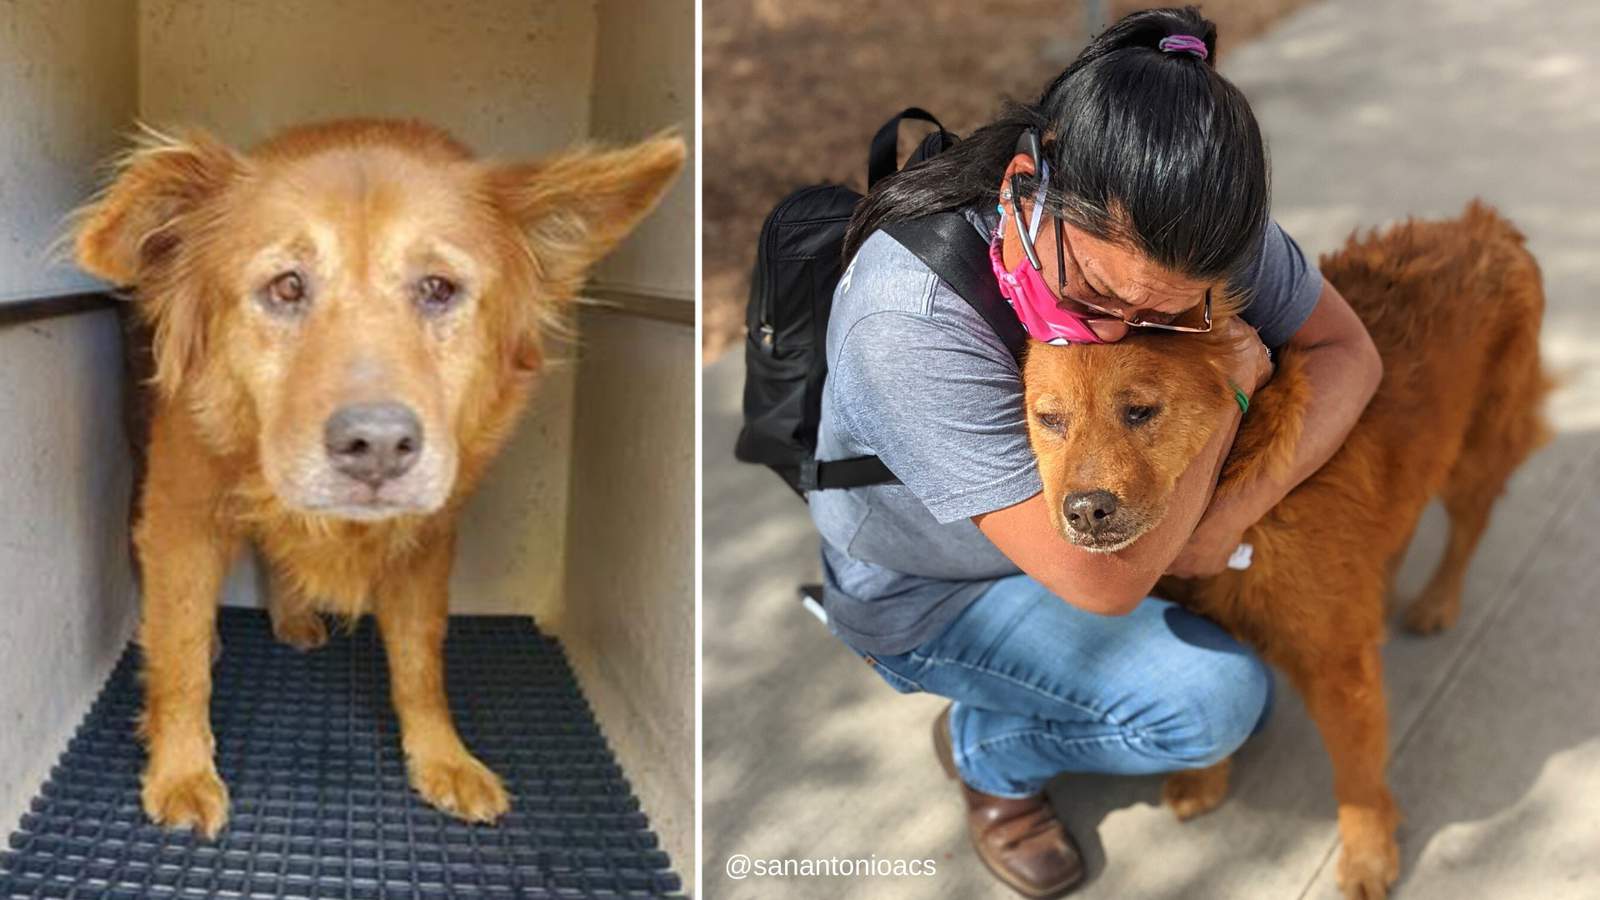 San Antonio dog picked up as a stray reunited with owner after 7 years